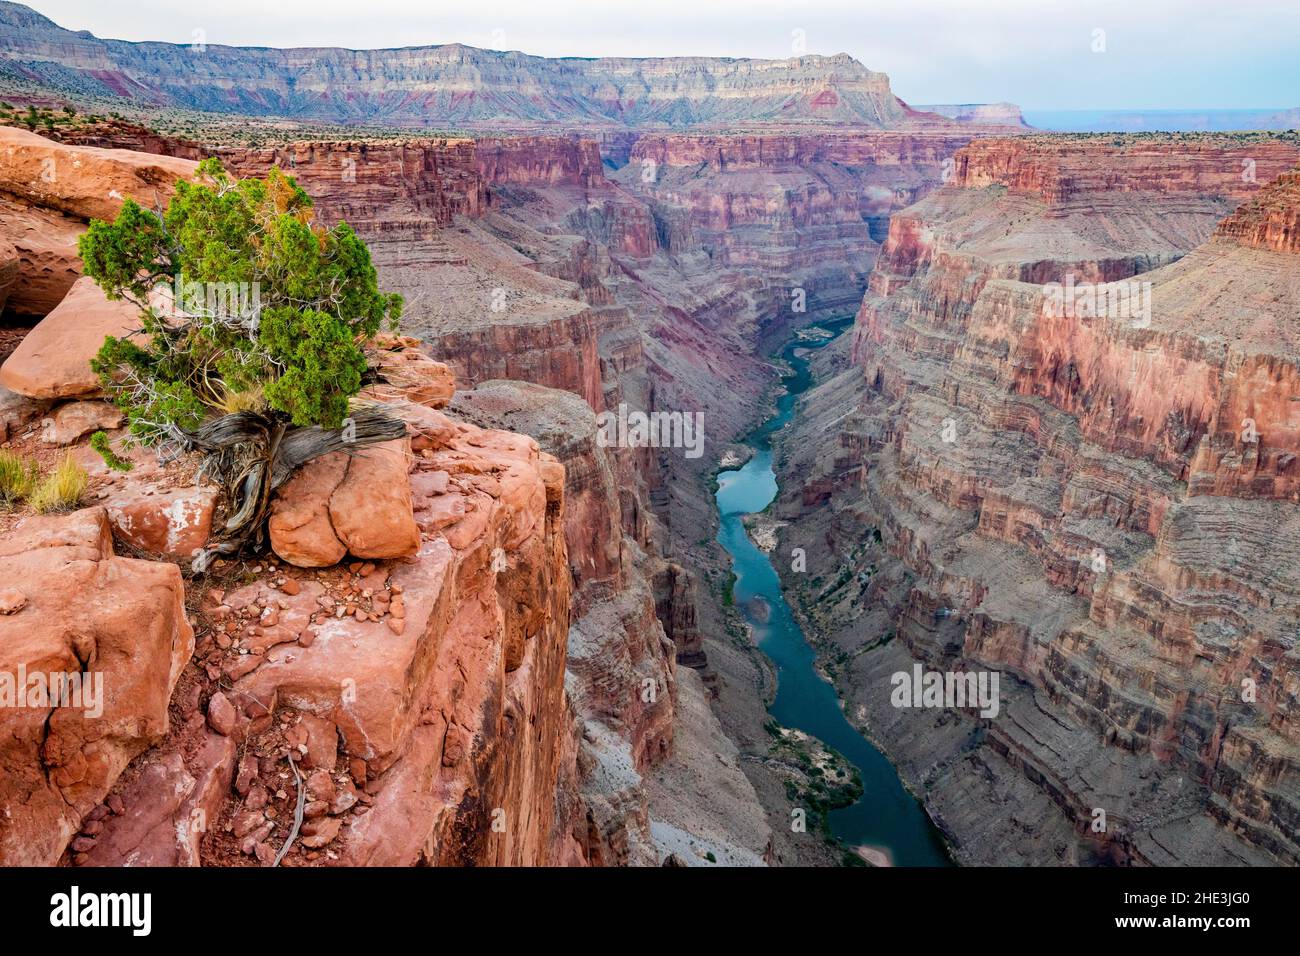 Colorado River deep in the bottom of Grand Canyon viewed from Toroweap point North Rim Grand Canyon National Park Arizona Stock Photo